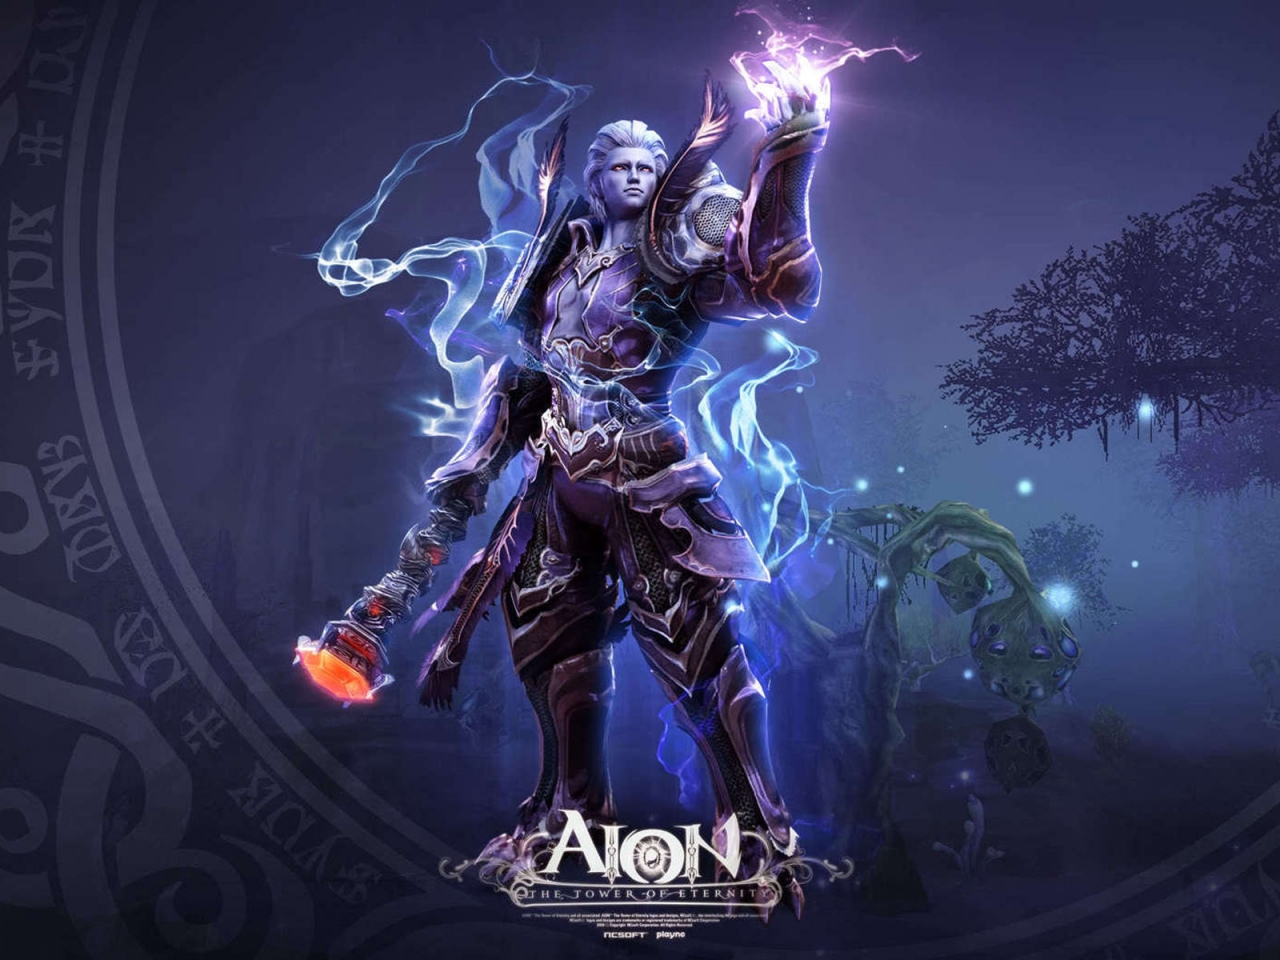 Aion The Tower of Eternity Game for 1280 x 960 resolution